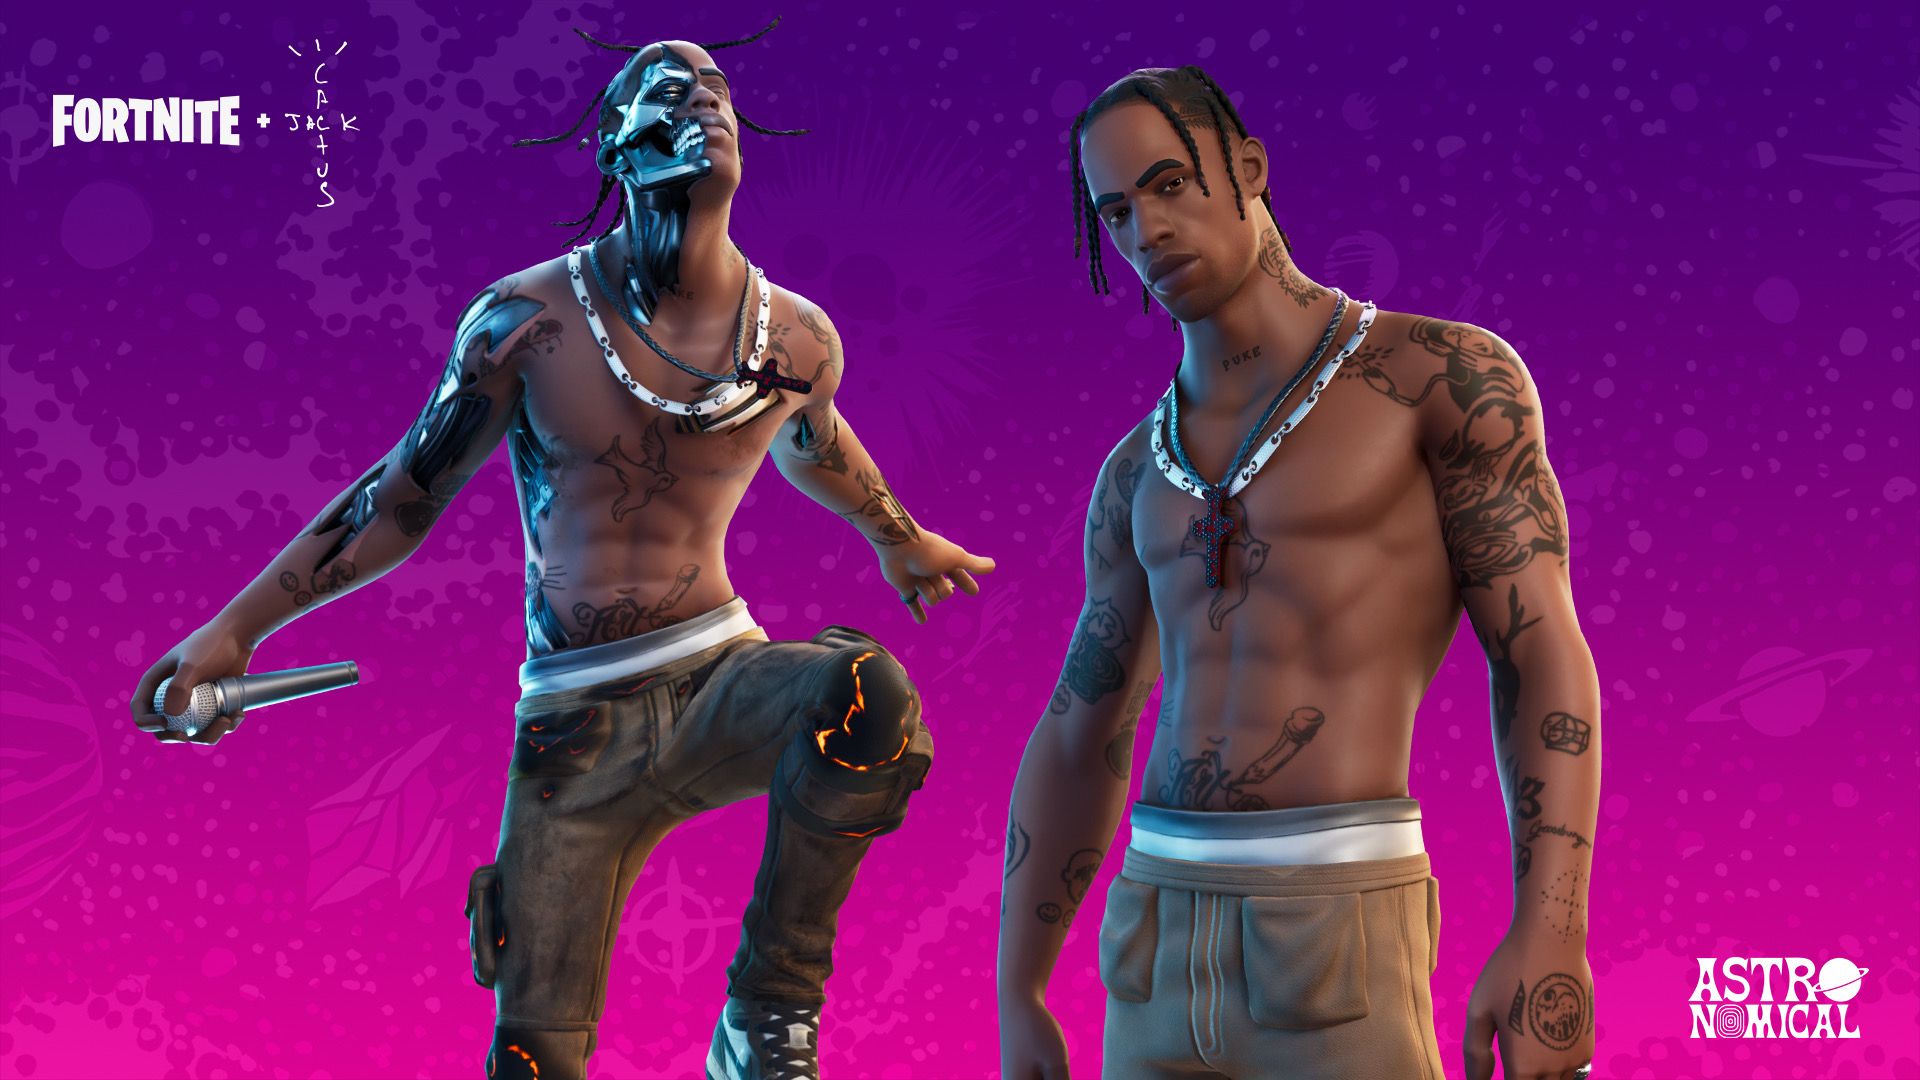 Over 12M Gamers Tuned in to Watch Travis Scott Get 'Astronomical